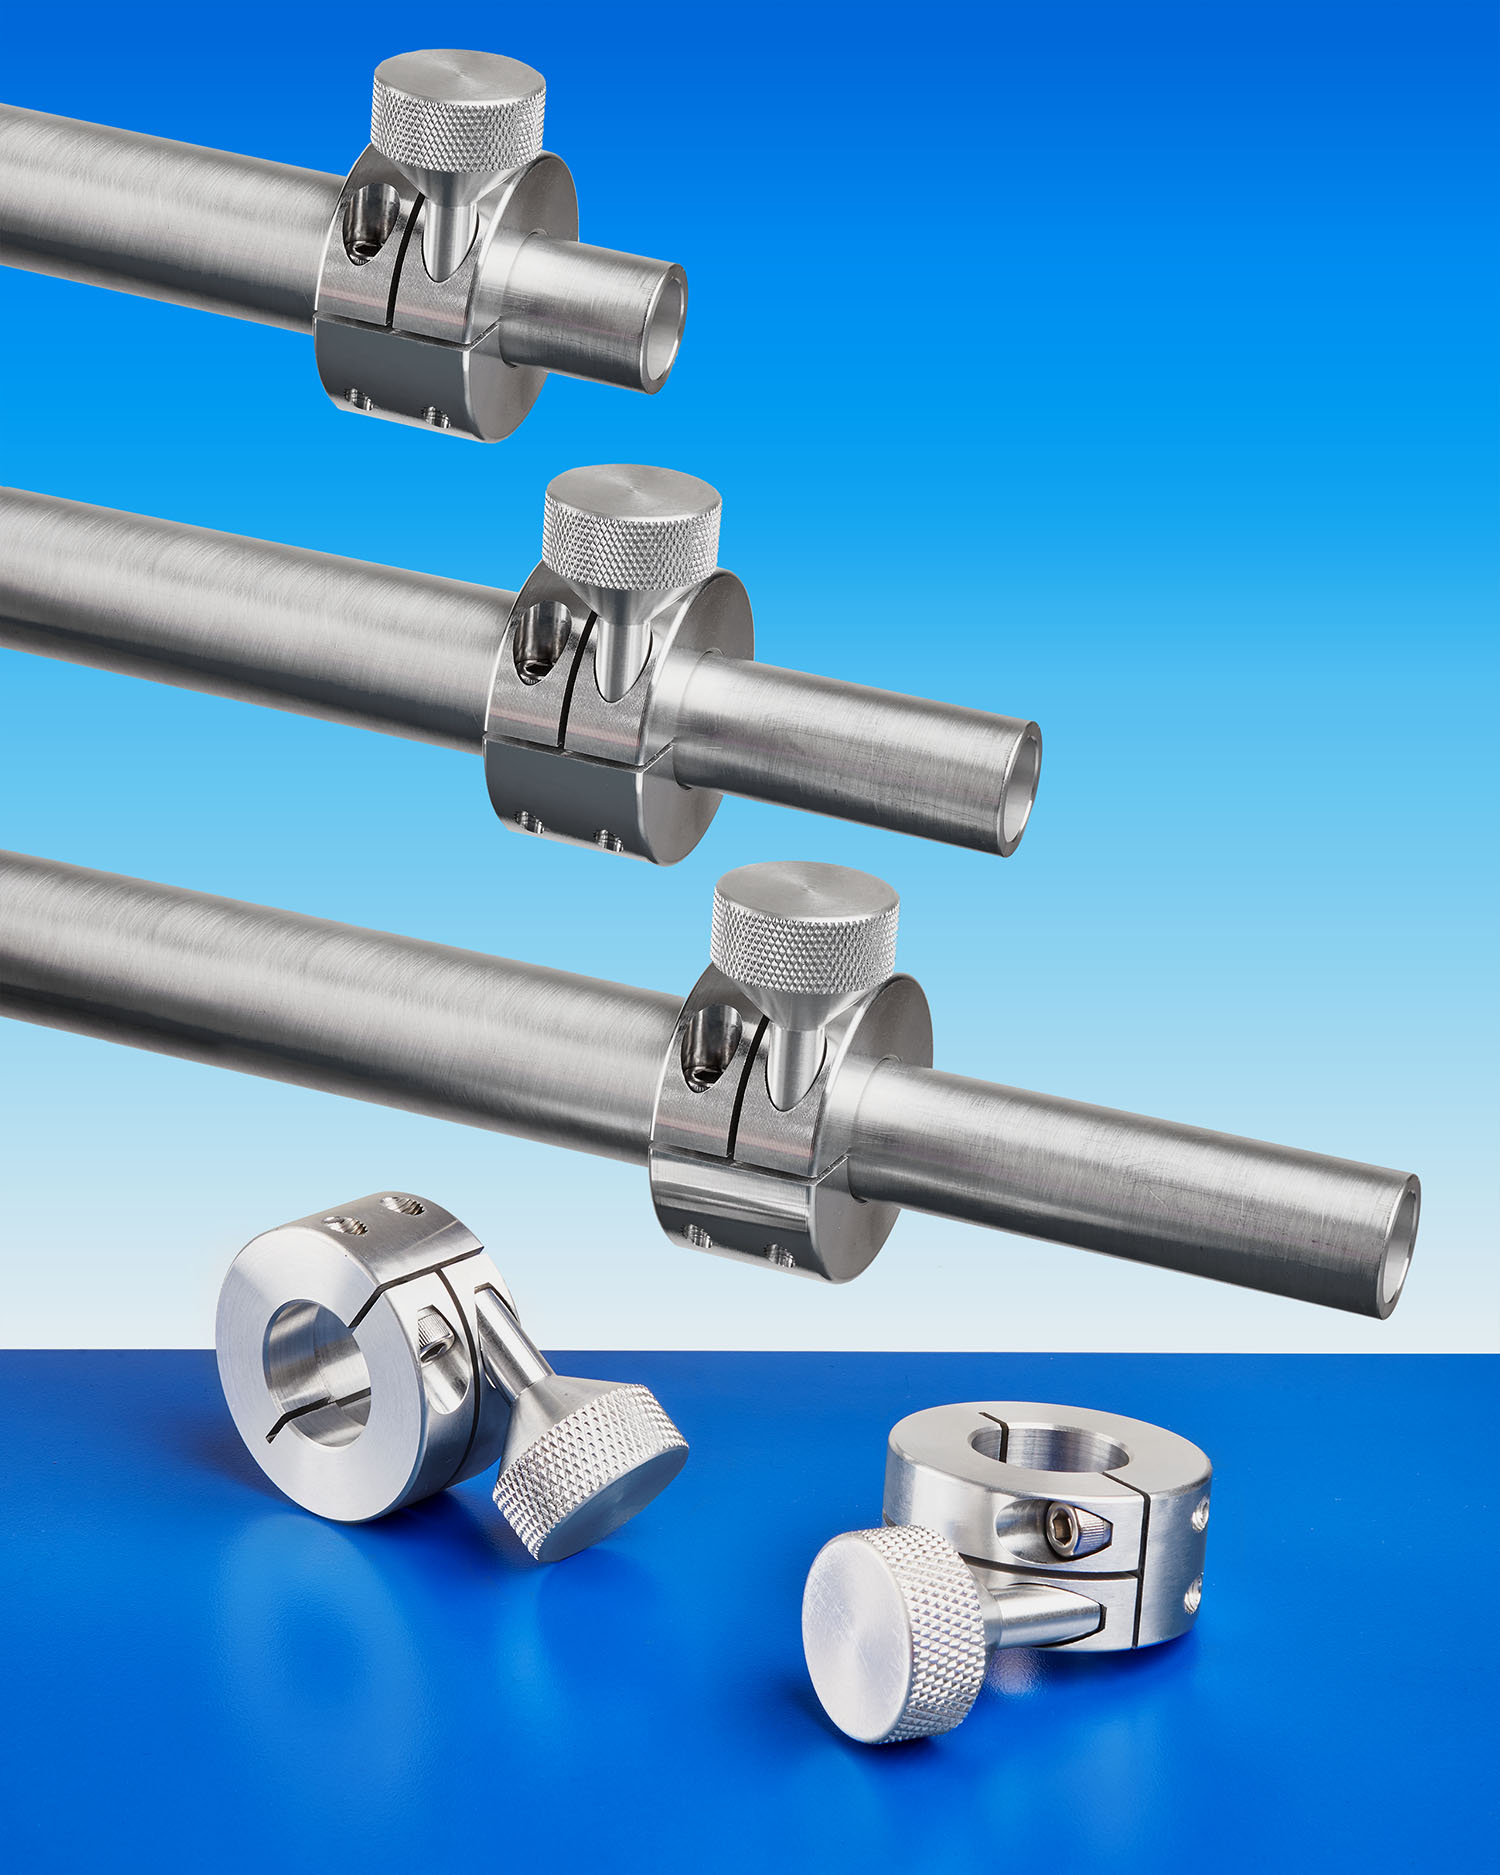 New Telescoping Tube Clamp from Stafford Manufacturing is Rigid With a Telescoping Tube Clamp Weight